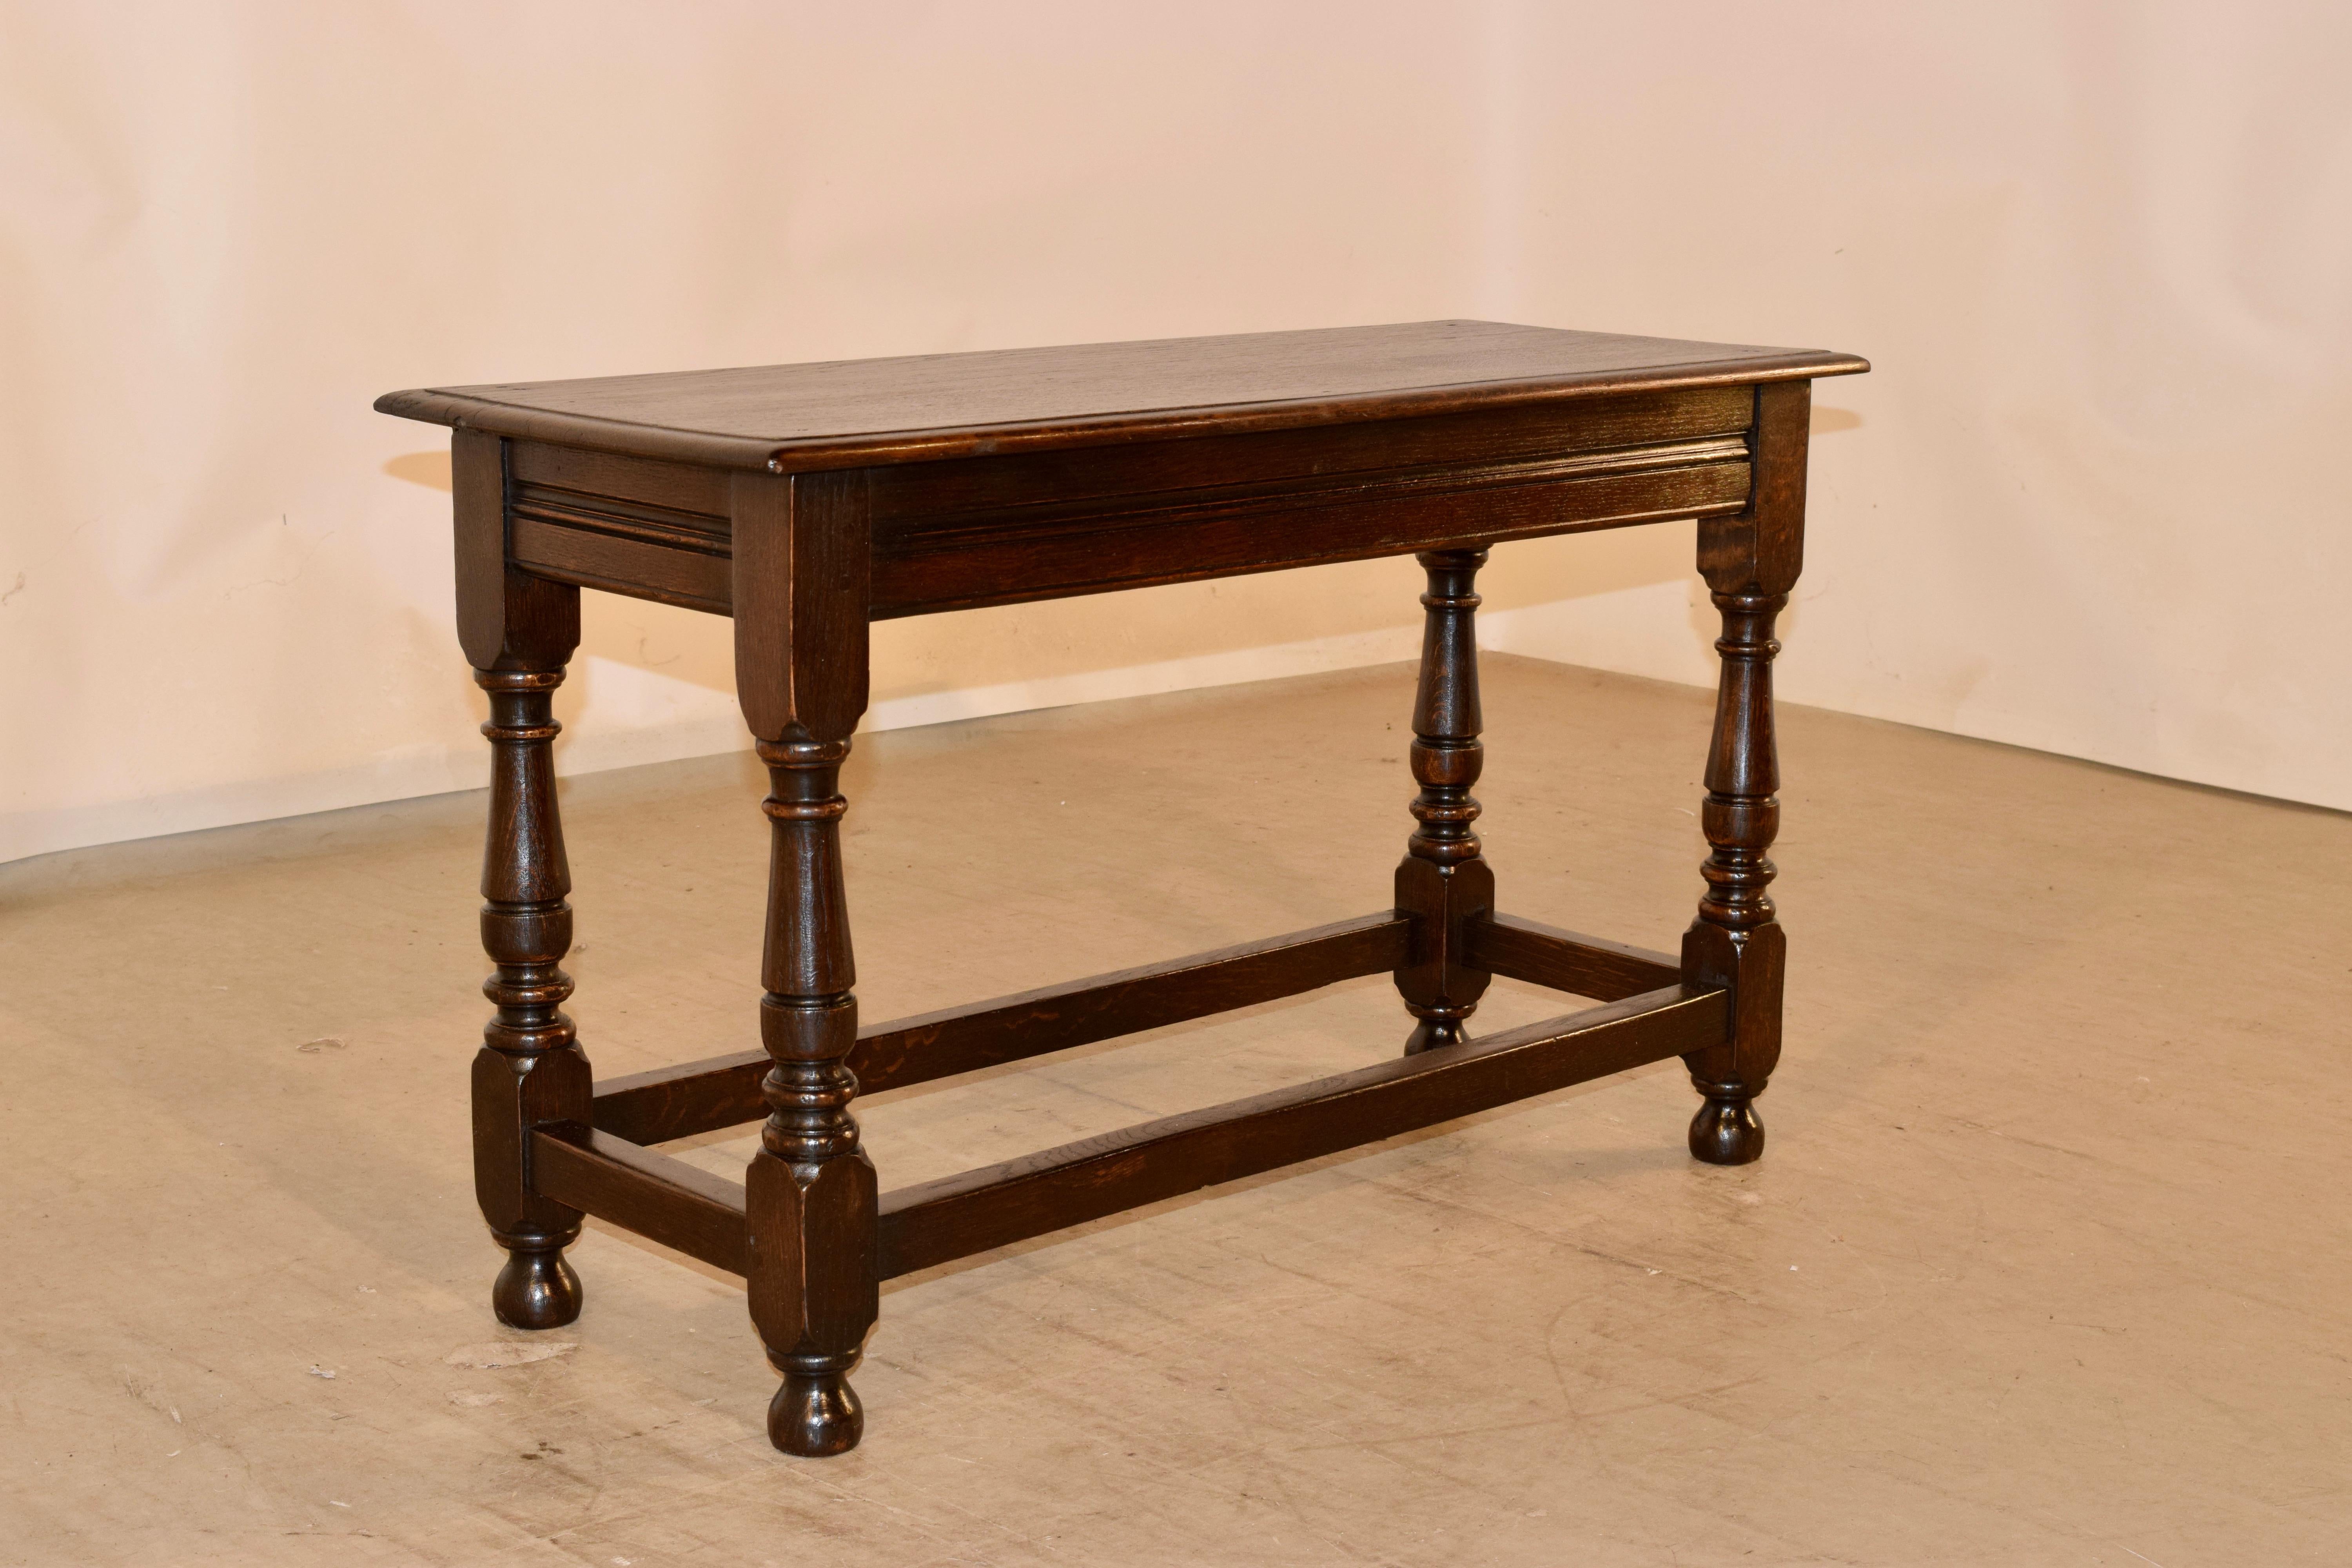 19th century oak joint bench with a beveled edge around the top, following down to a molded apron and supported on hand turned legs, joined by simple stretchers and raised on hand turned feet.